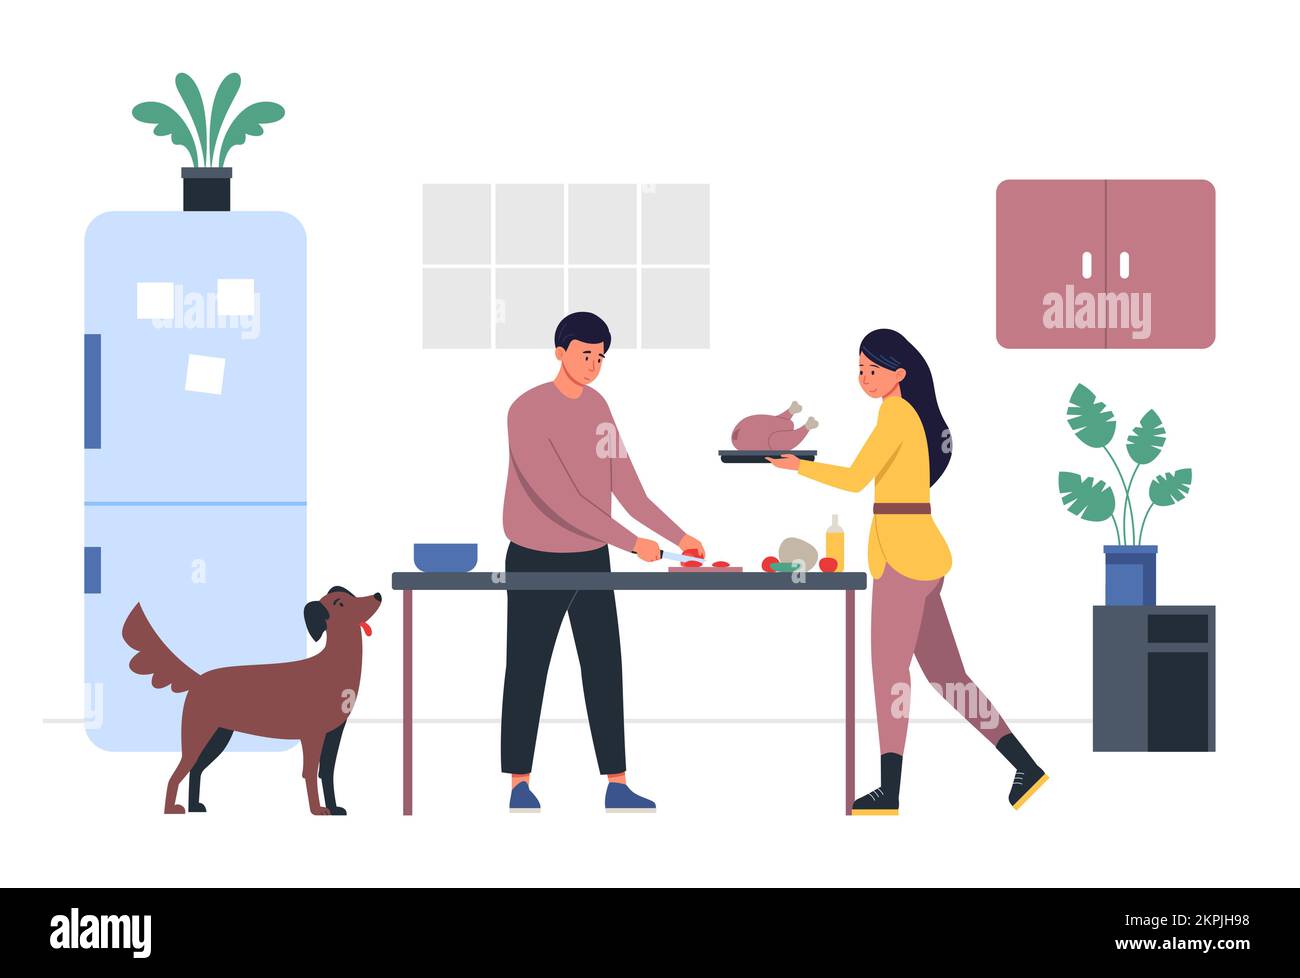 People cooking dinner in kitchen. Man cutting vegetables, woman carrying chicken. Couple preparing food together, dog looking at table. Happy family m Stock Vector